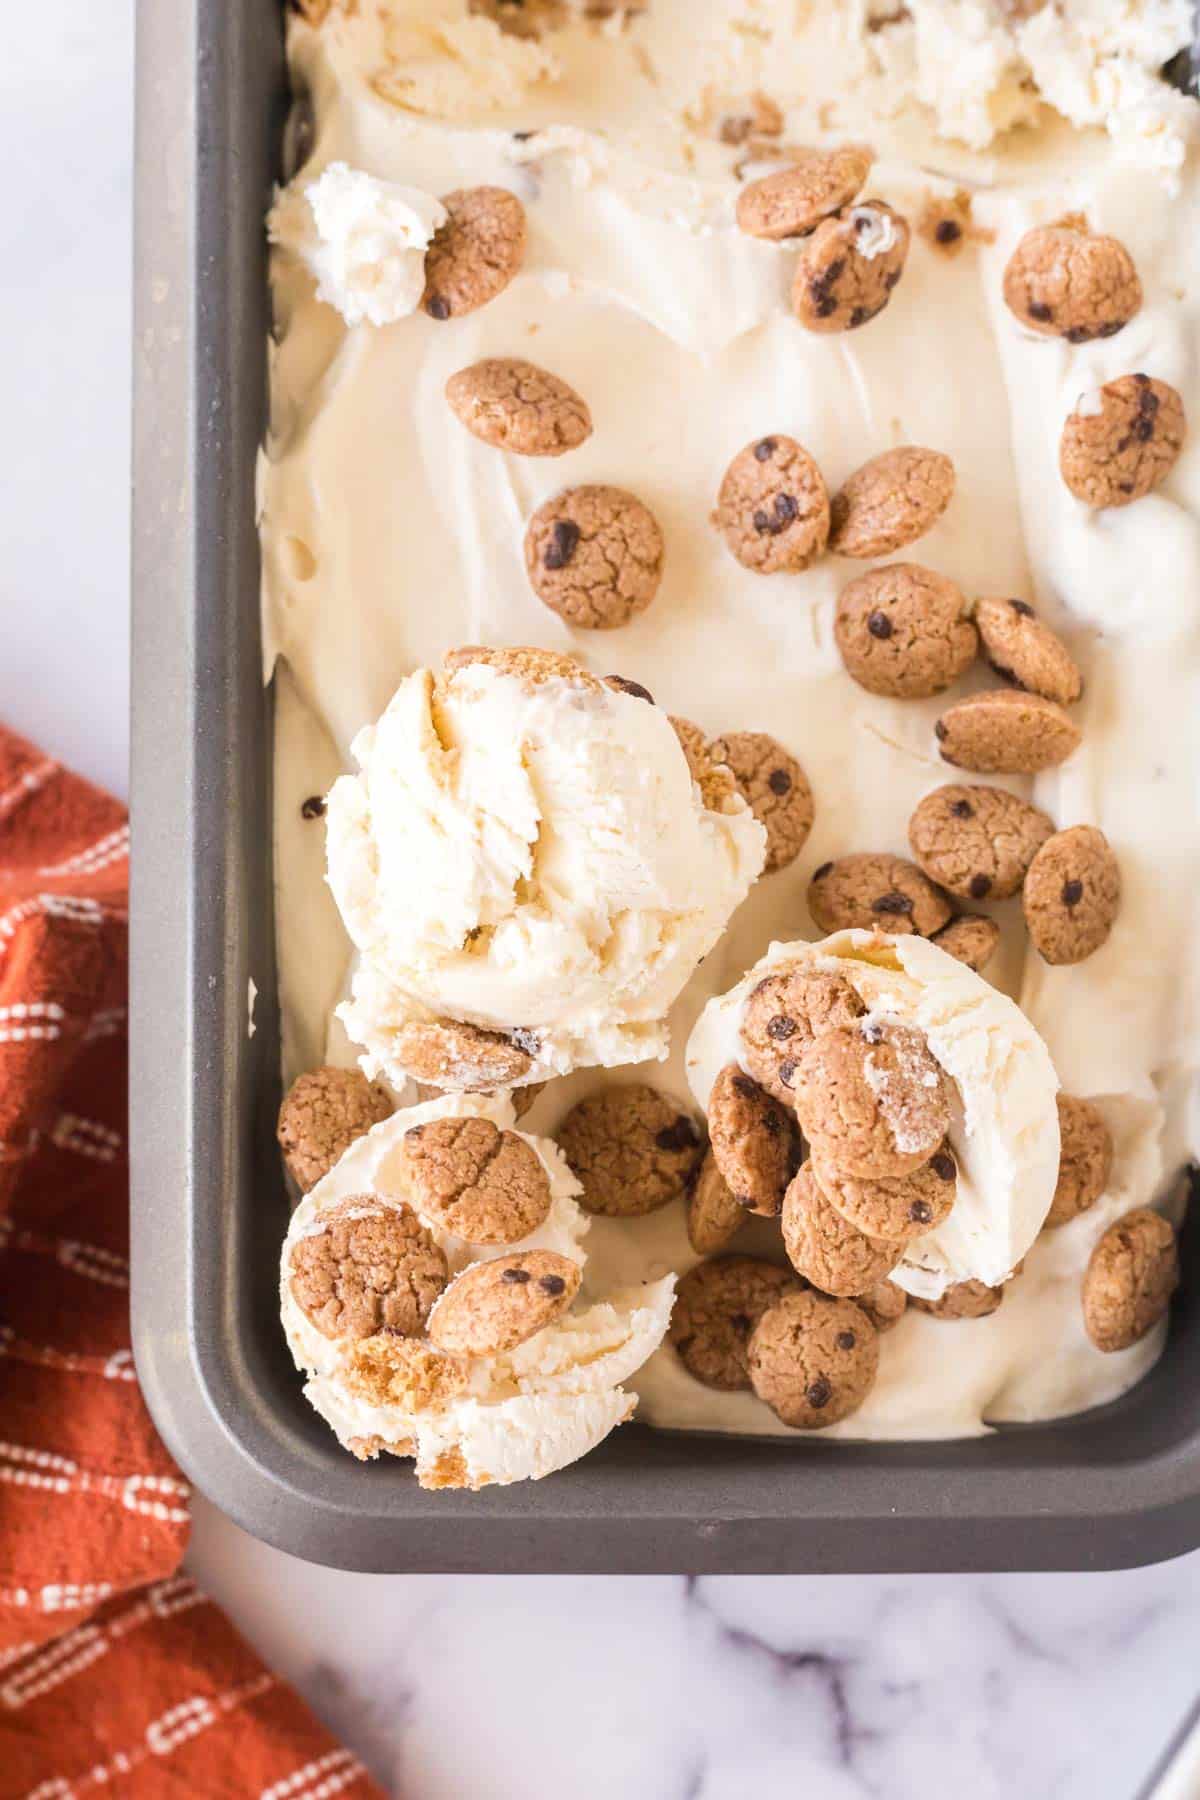 A pan on no-churn chocolate chip cookie ice cream with 3 scoops ready to serve.